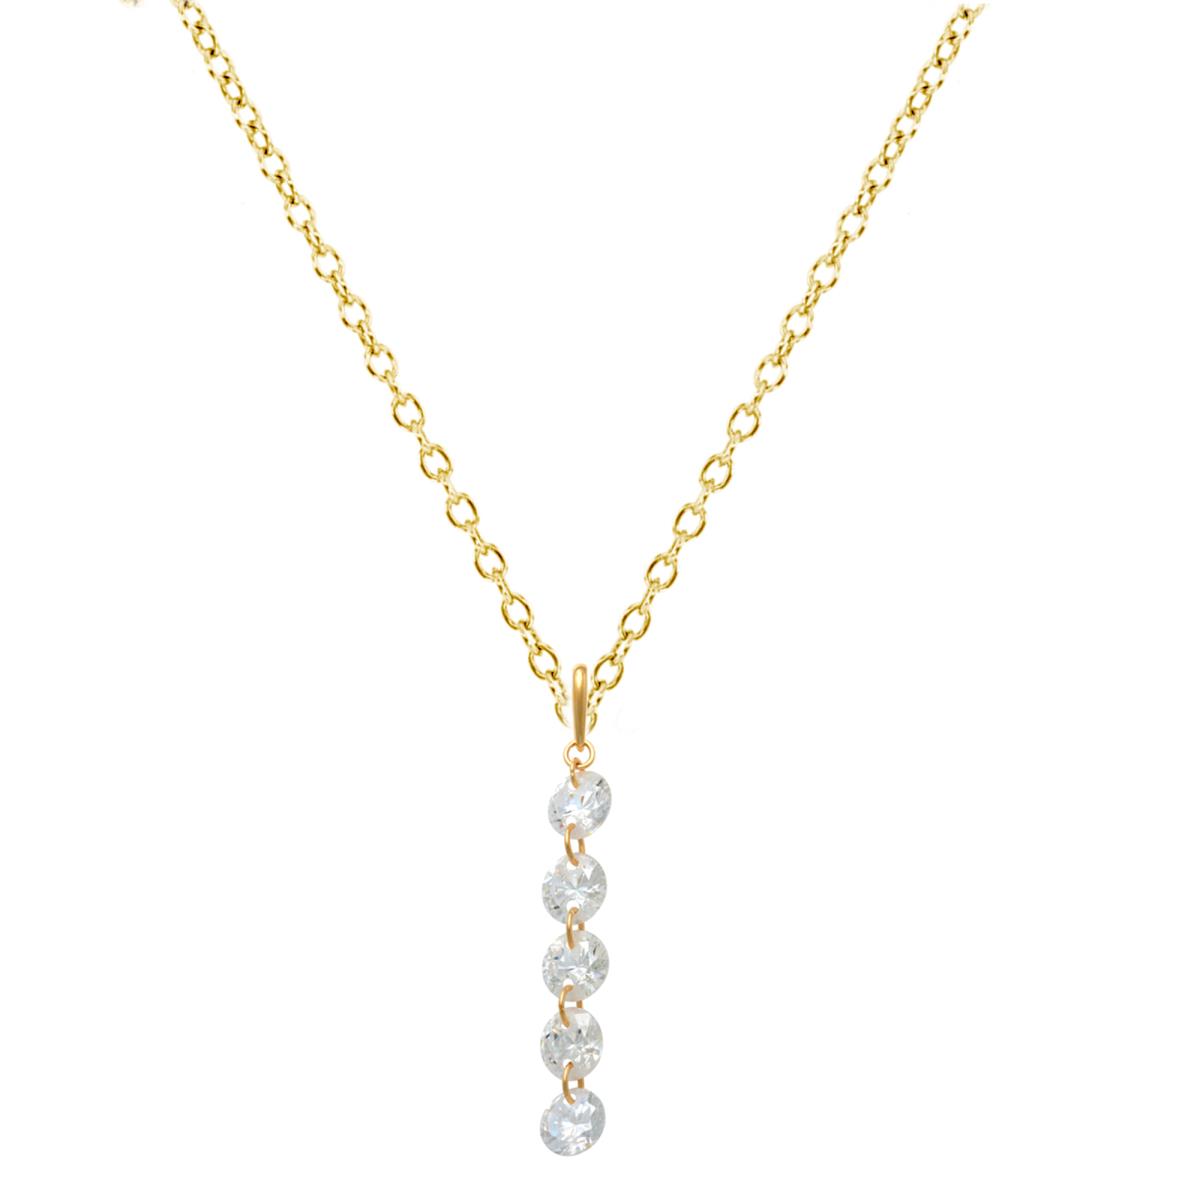 10K Yellow Gold Dangling 5 Stone White CZ  18" Necklace